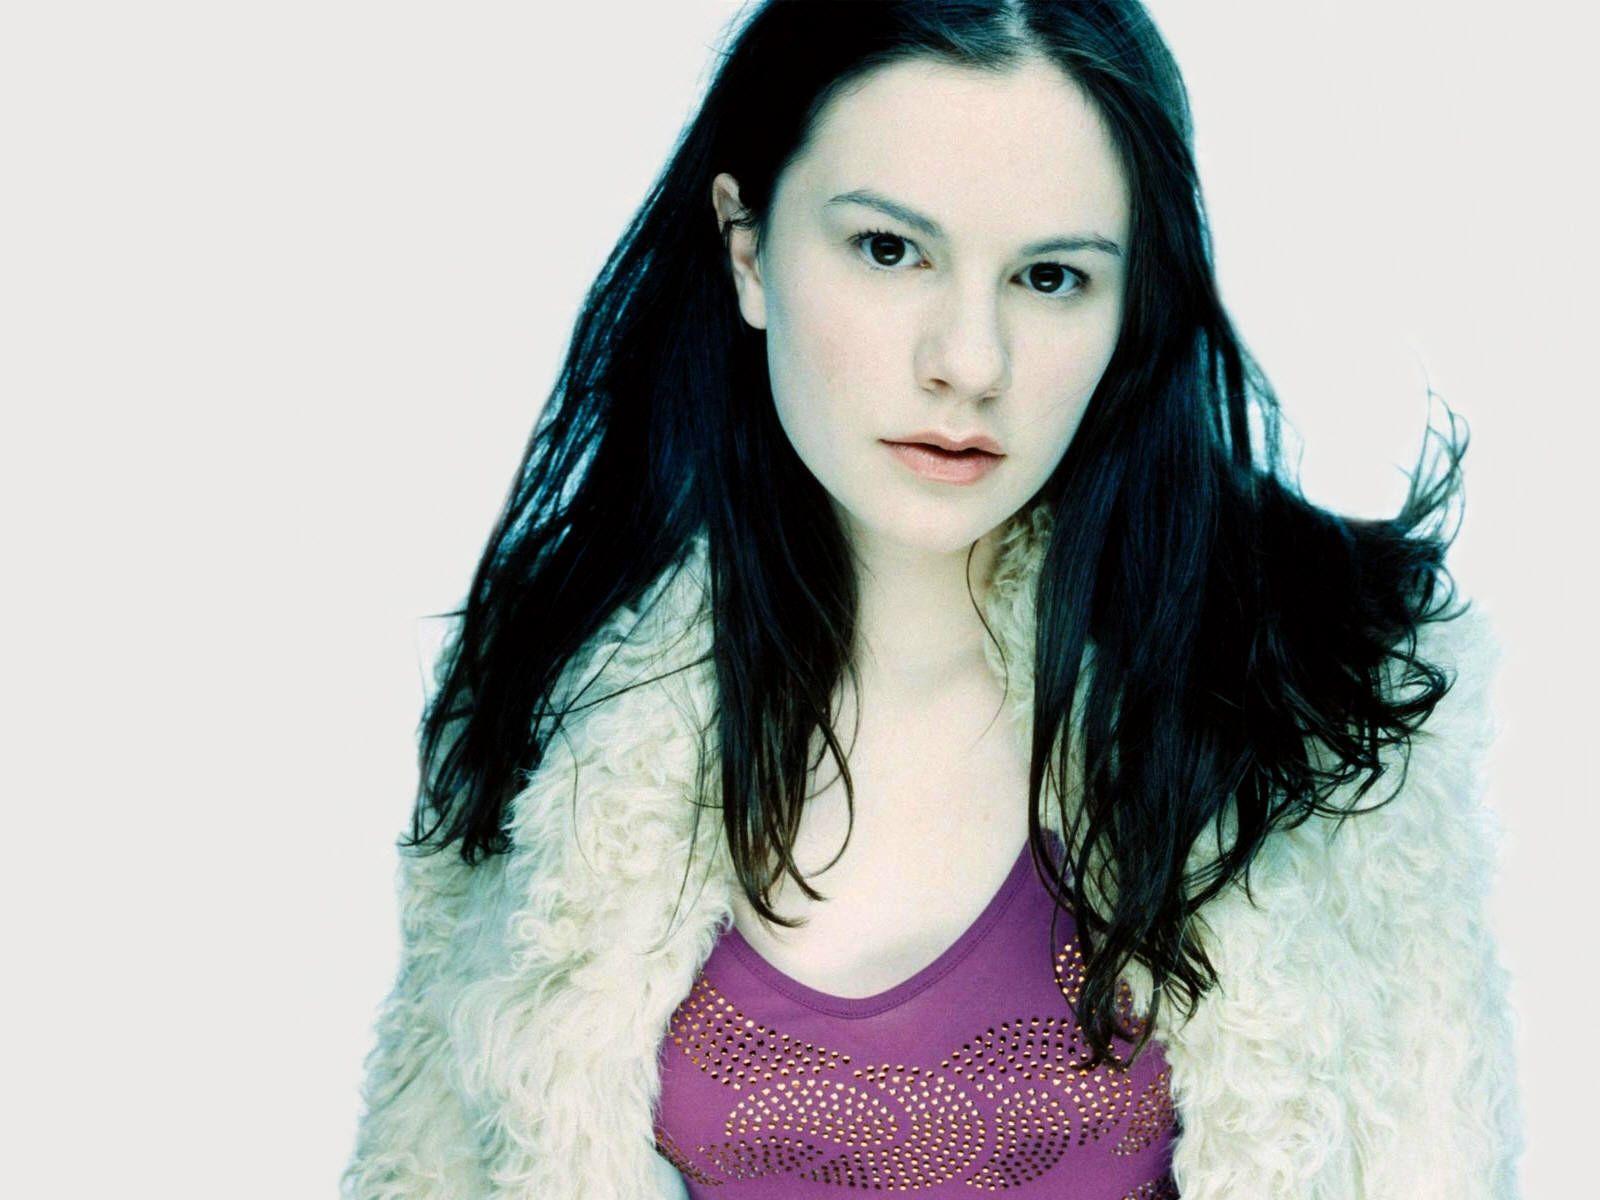 Anna Paquin Hot Picture, Photo Gallery & Wallpaper